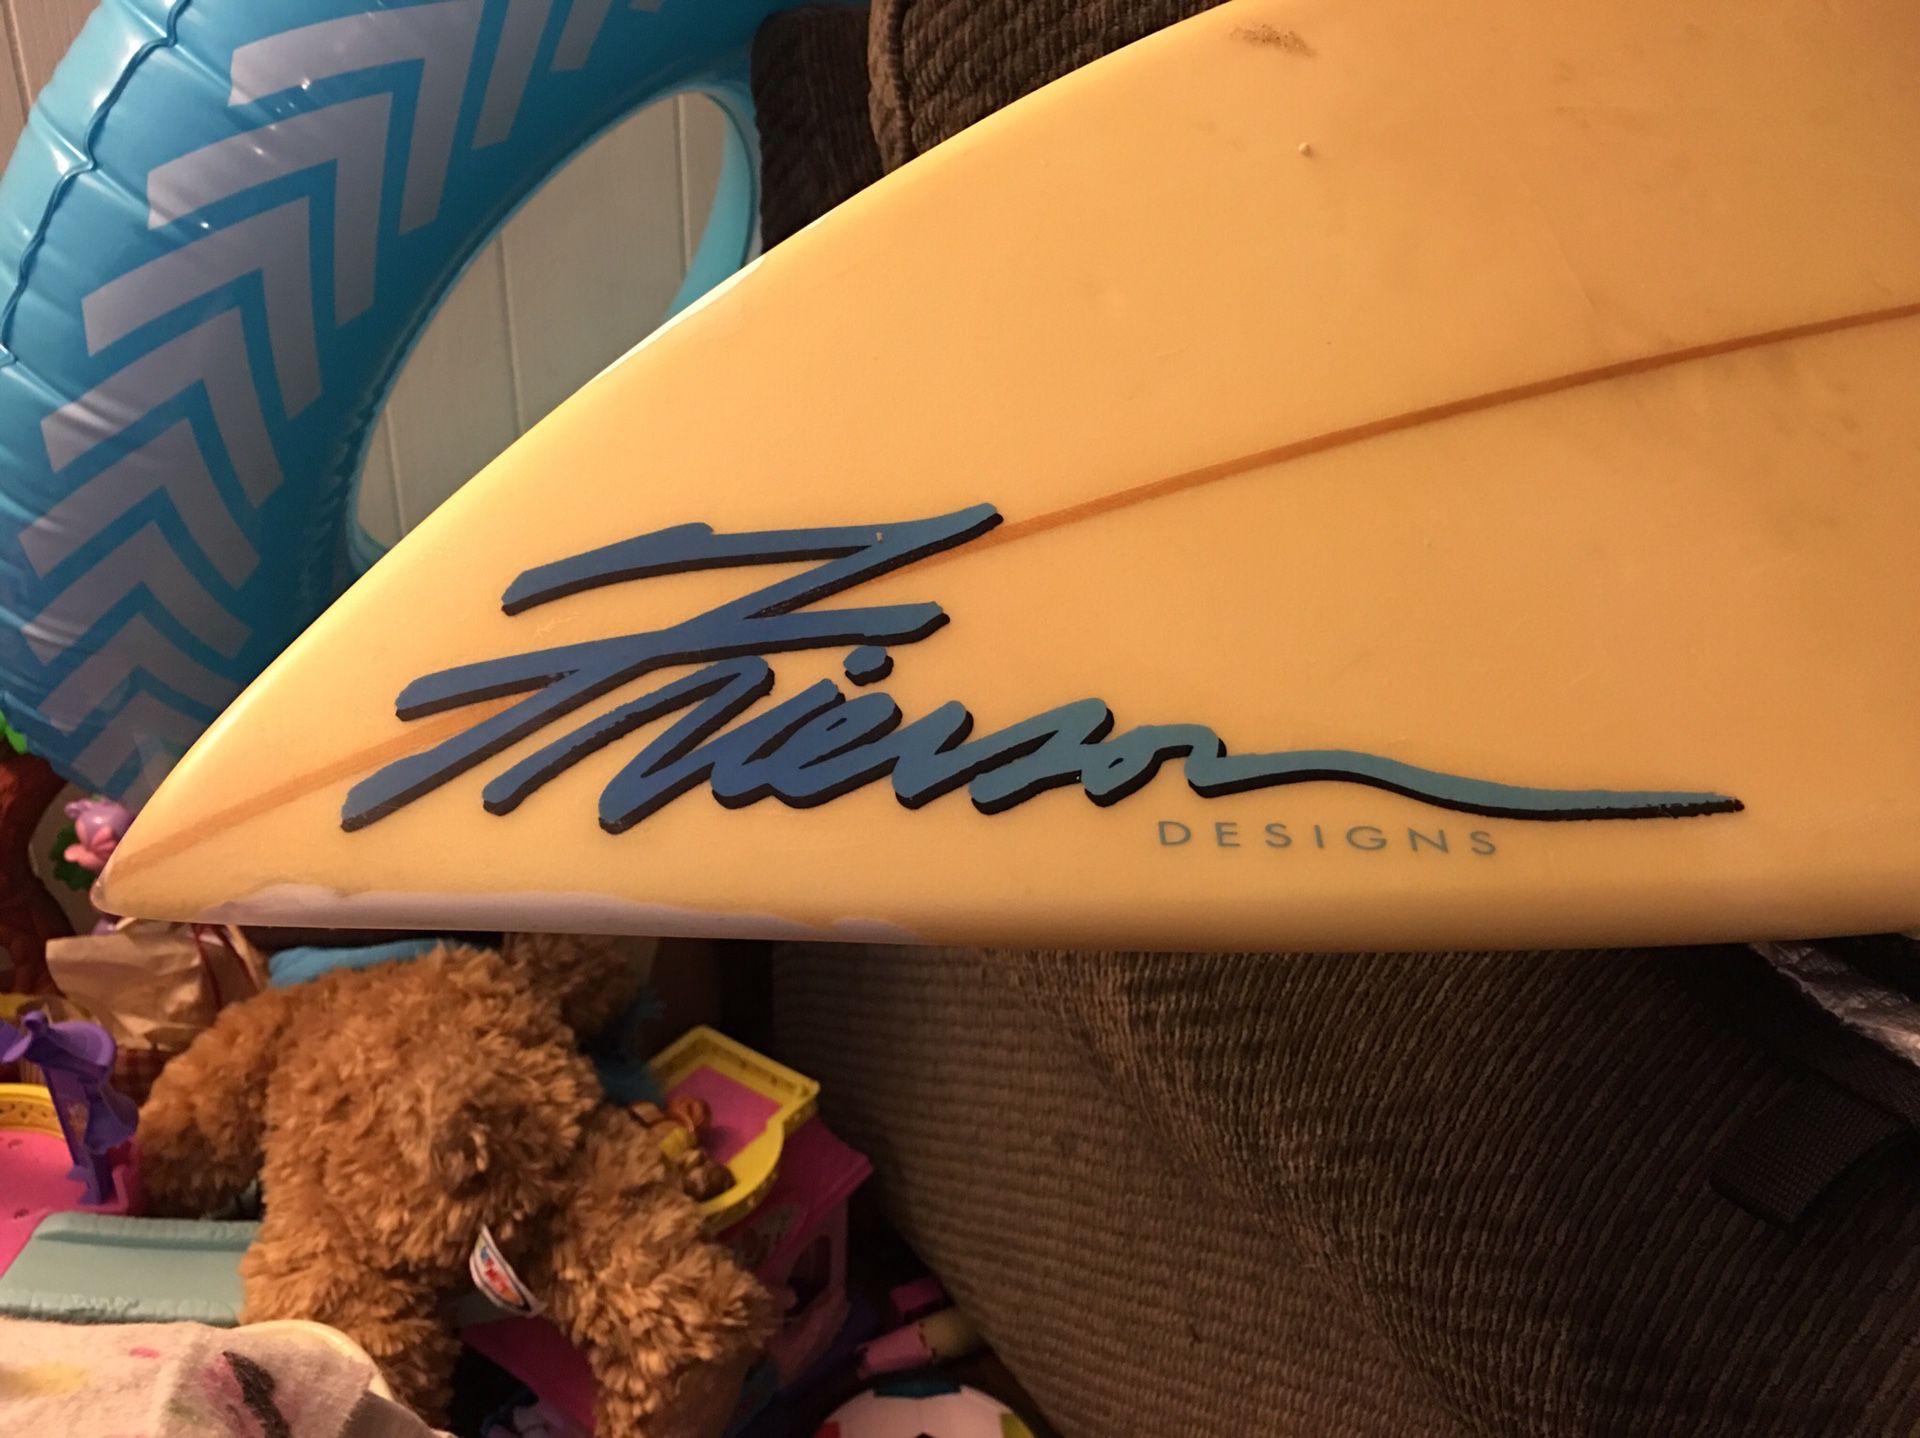 Frierson 6'10" Surfboard - price reduced!